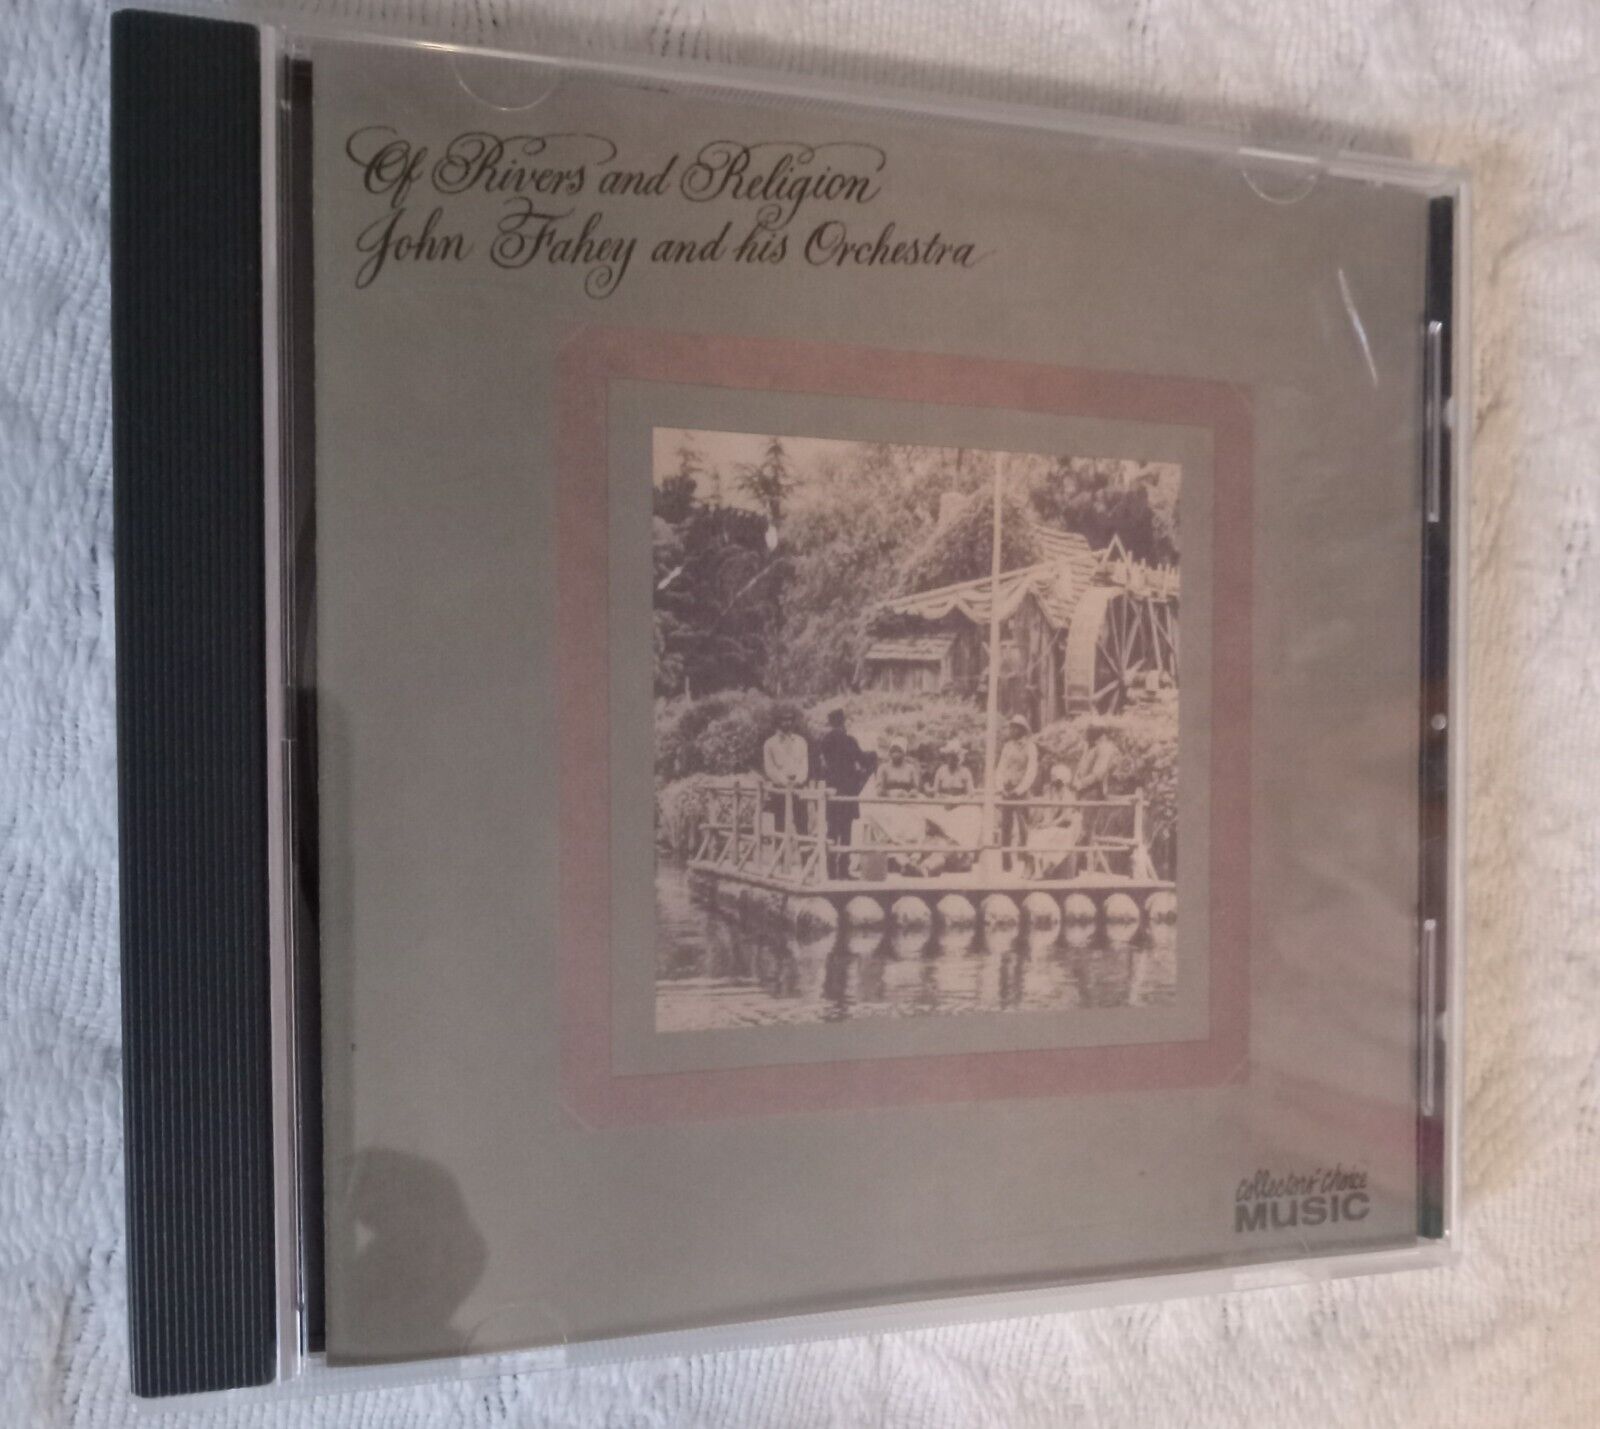 Of Rivers & Religion by John Fahey (CD, Jul-2001, Collectors' Choice Music)